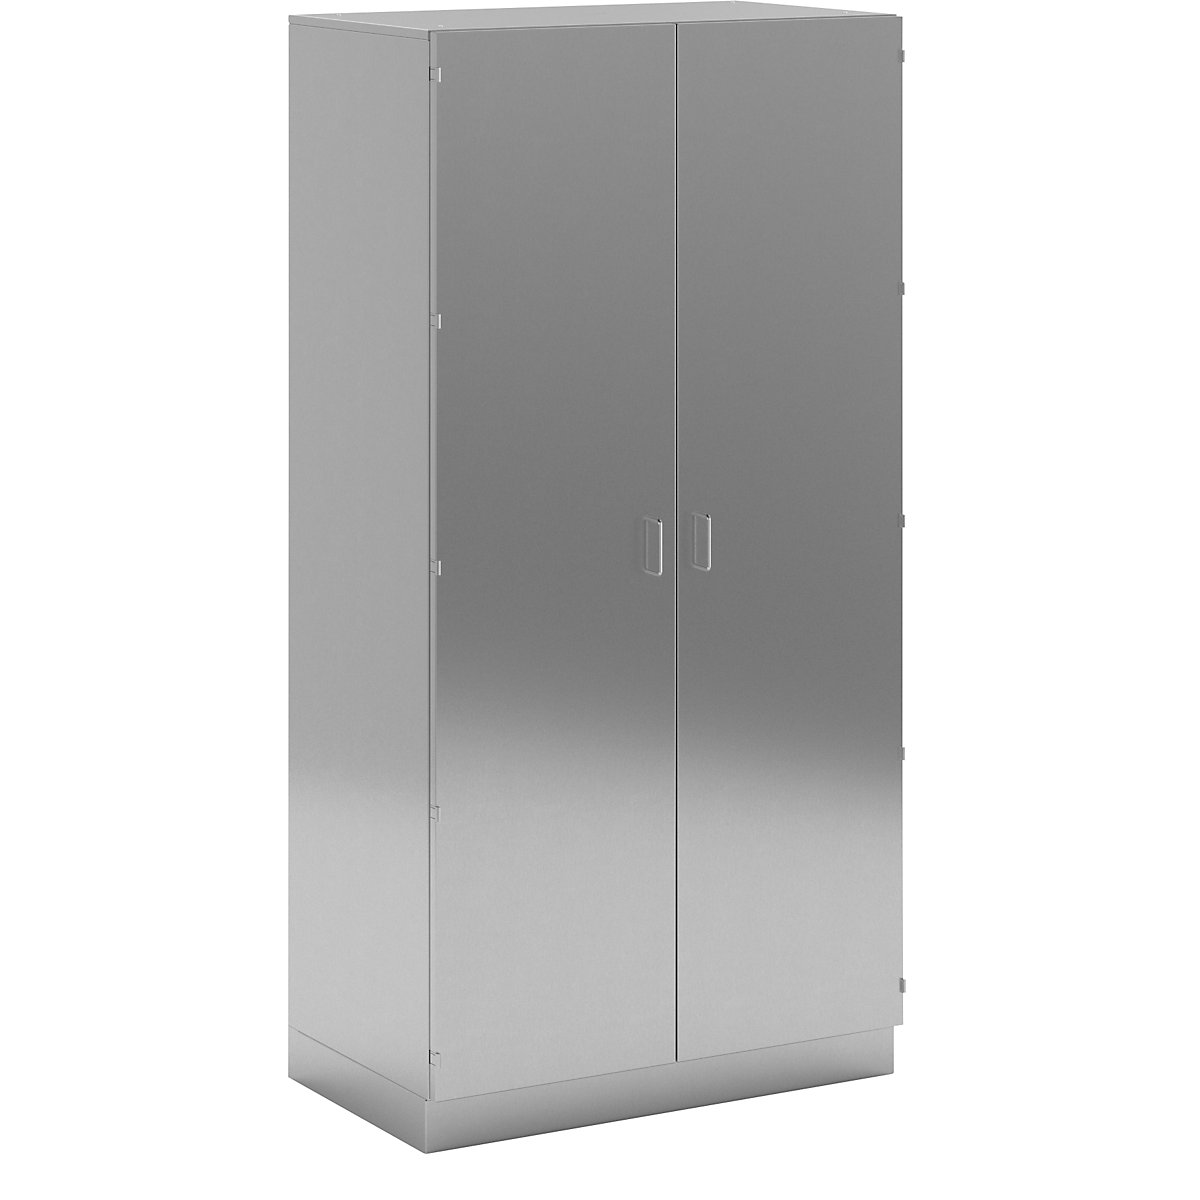 Cleanroom full height cupboard made of stainless steel